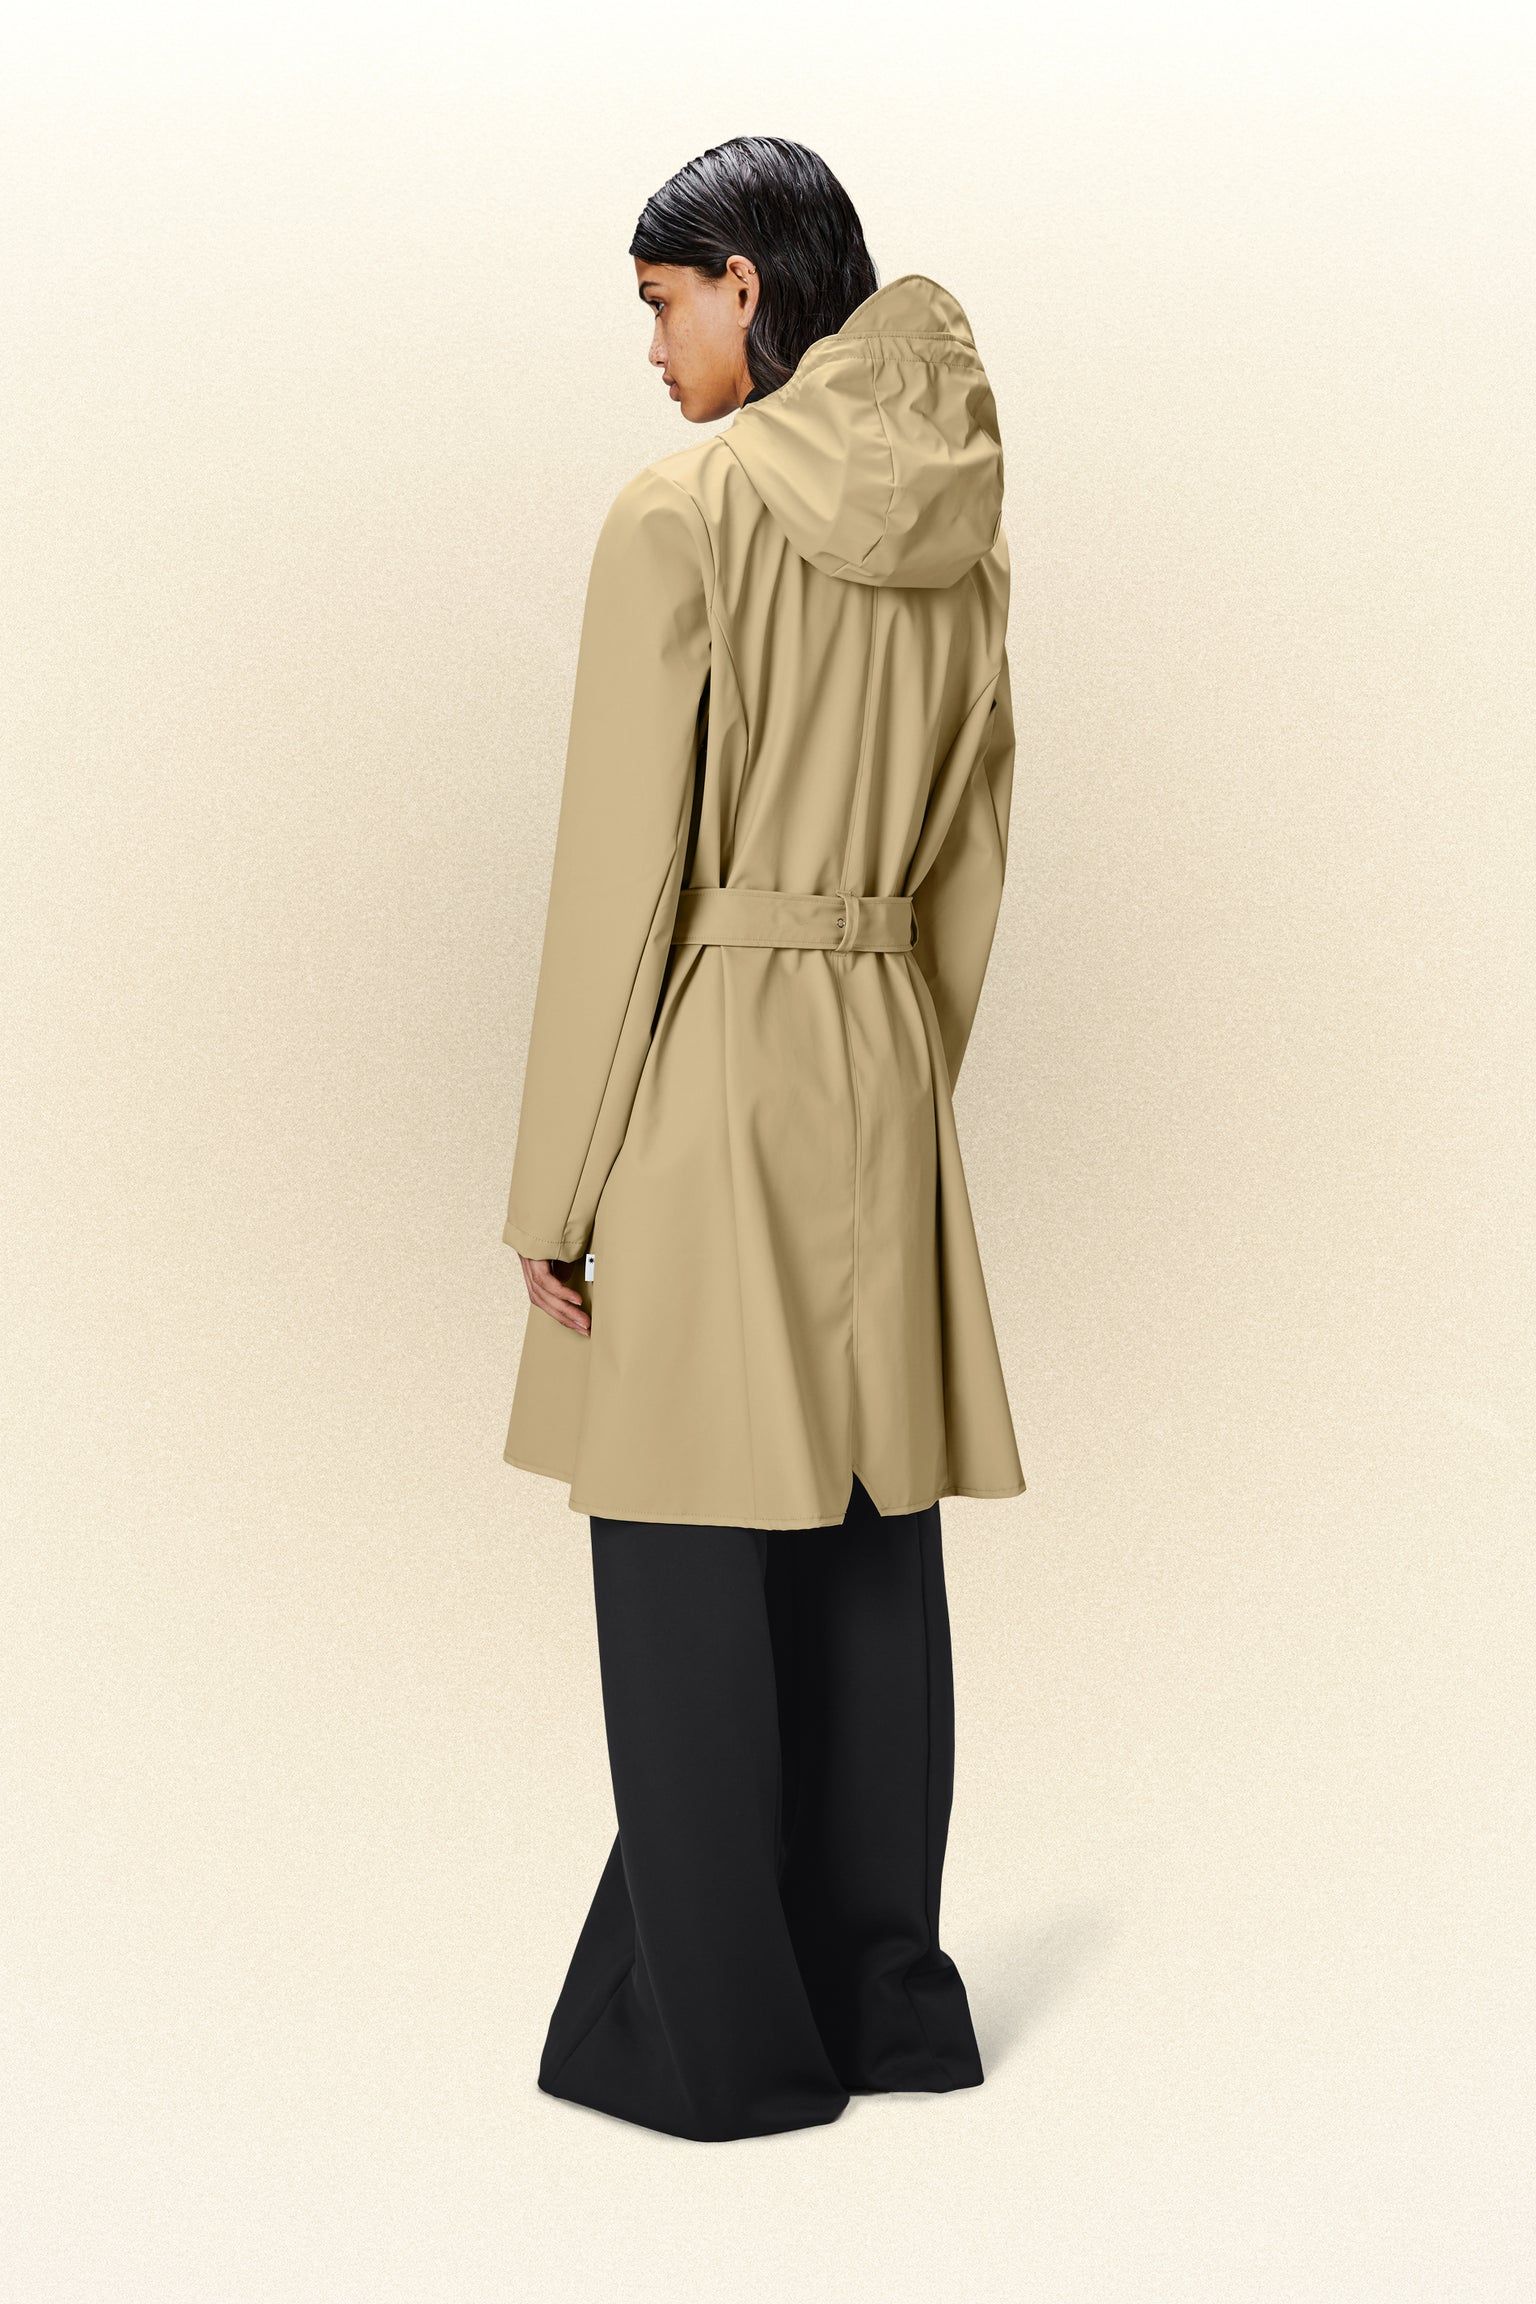 Product Image for Curve W Jacket W3, Sand